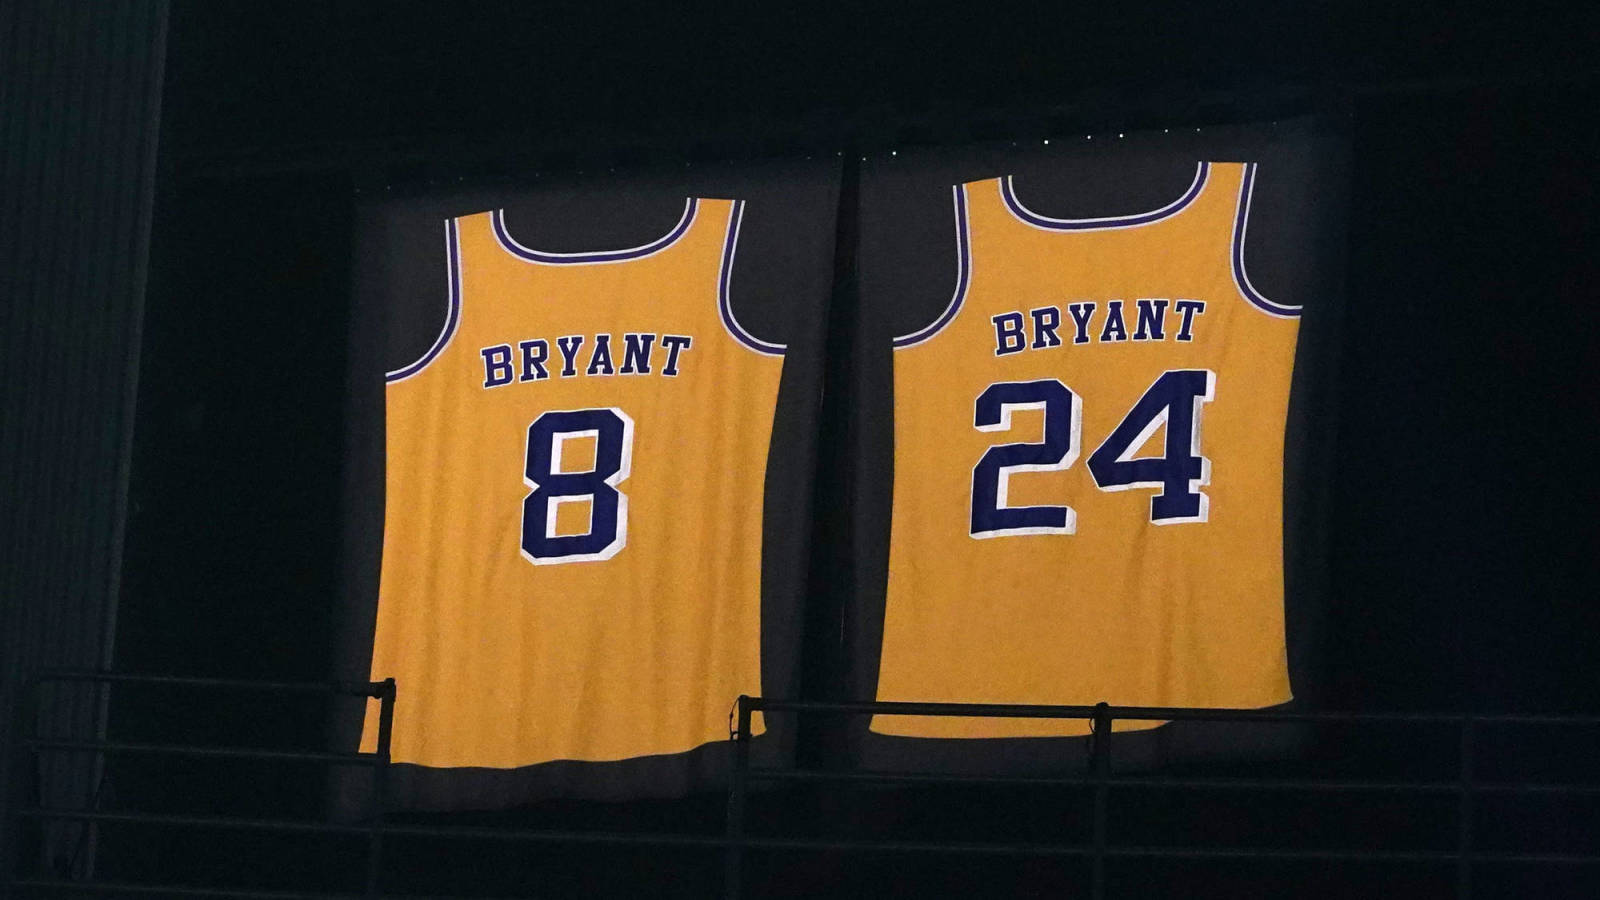 Kobe Bryant Day: Lakers to wear Black Mamba uniforms in Game 4 of